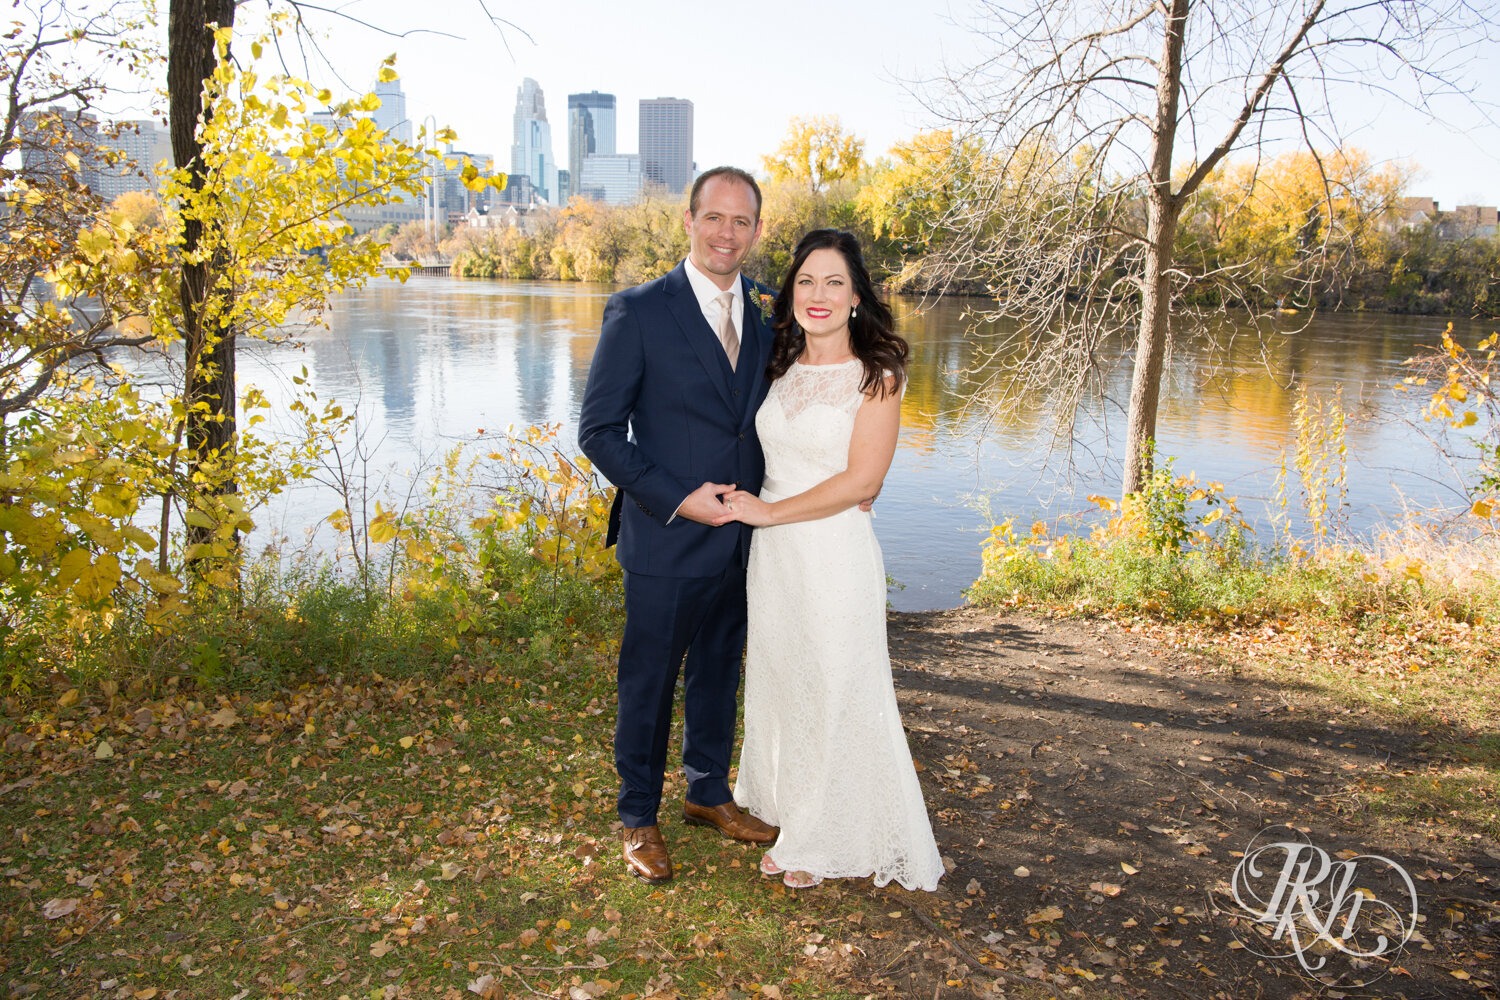 Bride and groom smile in front of river on Boom Island in Minneapolis, Minnesota.